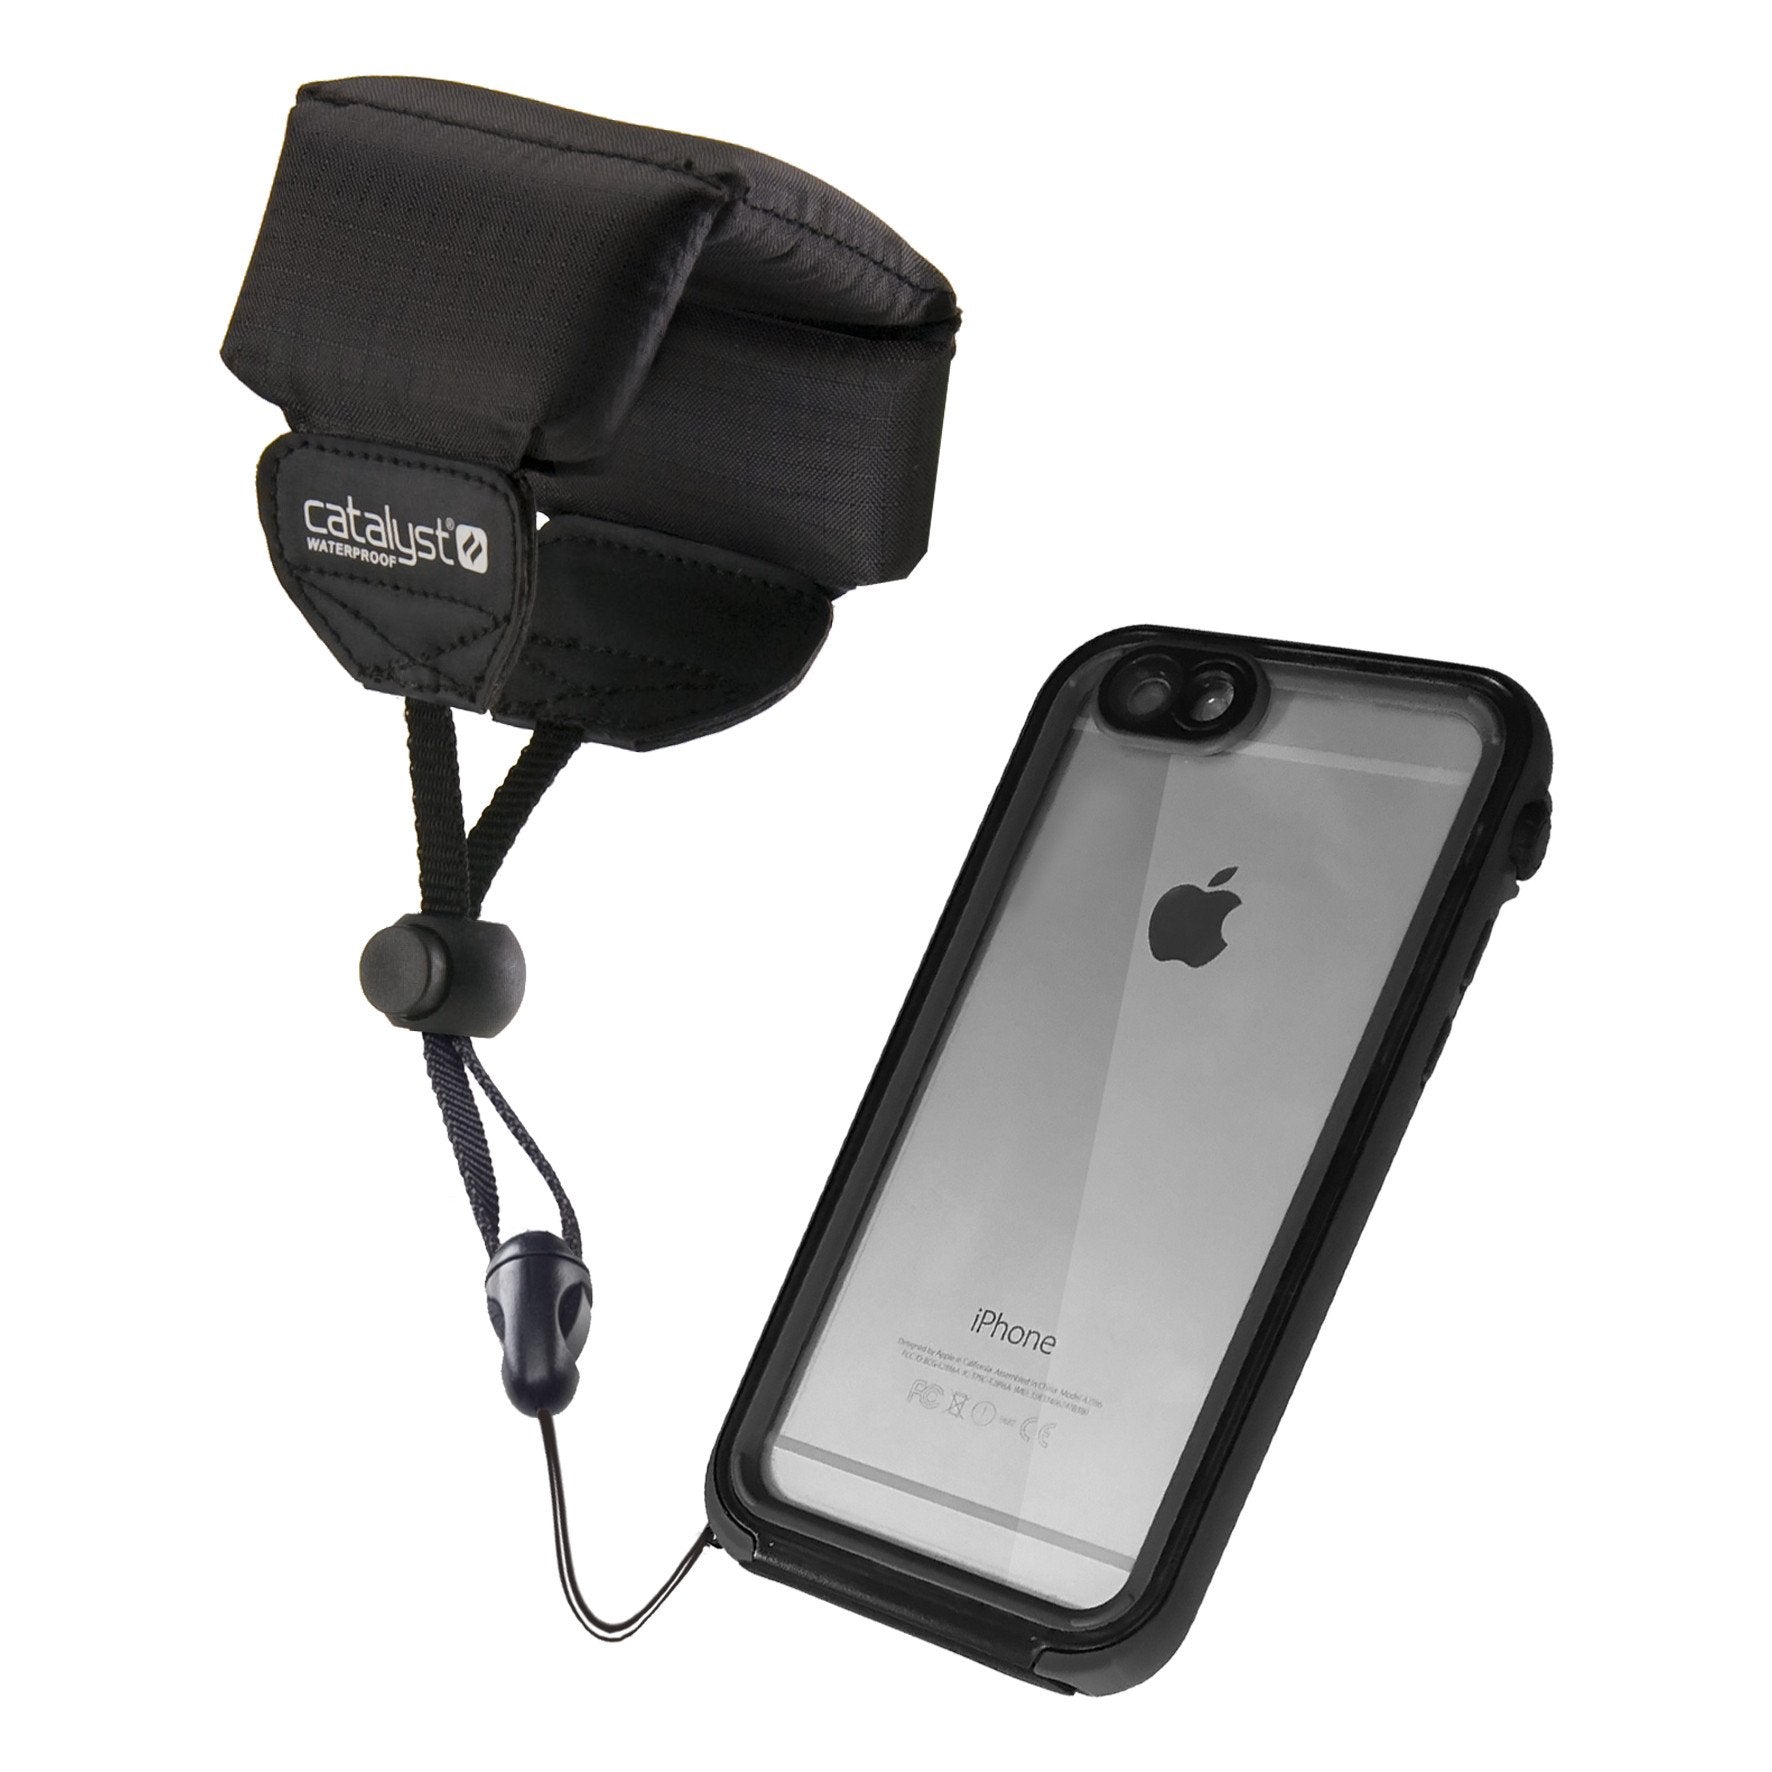 CATFLAN250 | Floating Lanyard for Catalyst iPhone Case - Stealth Black